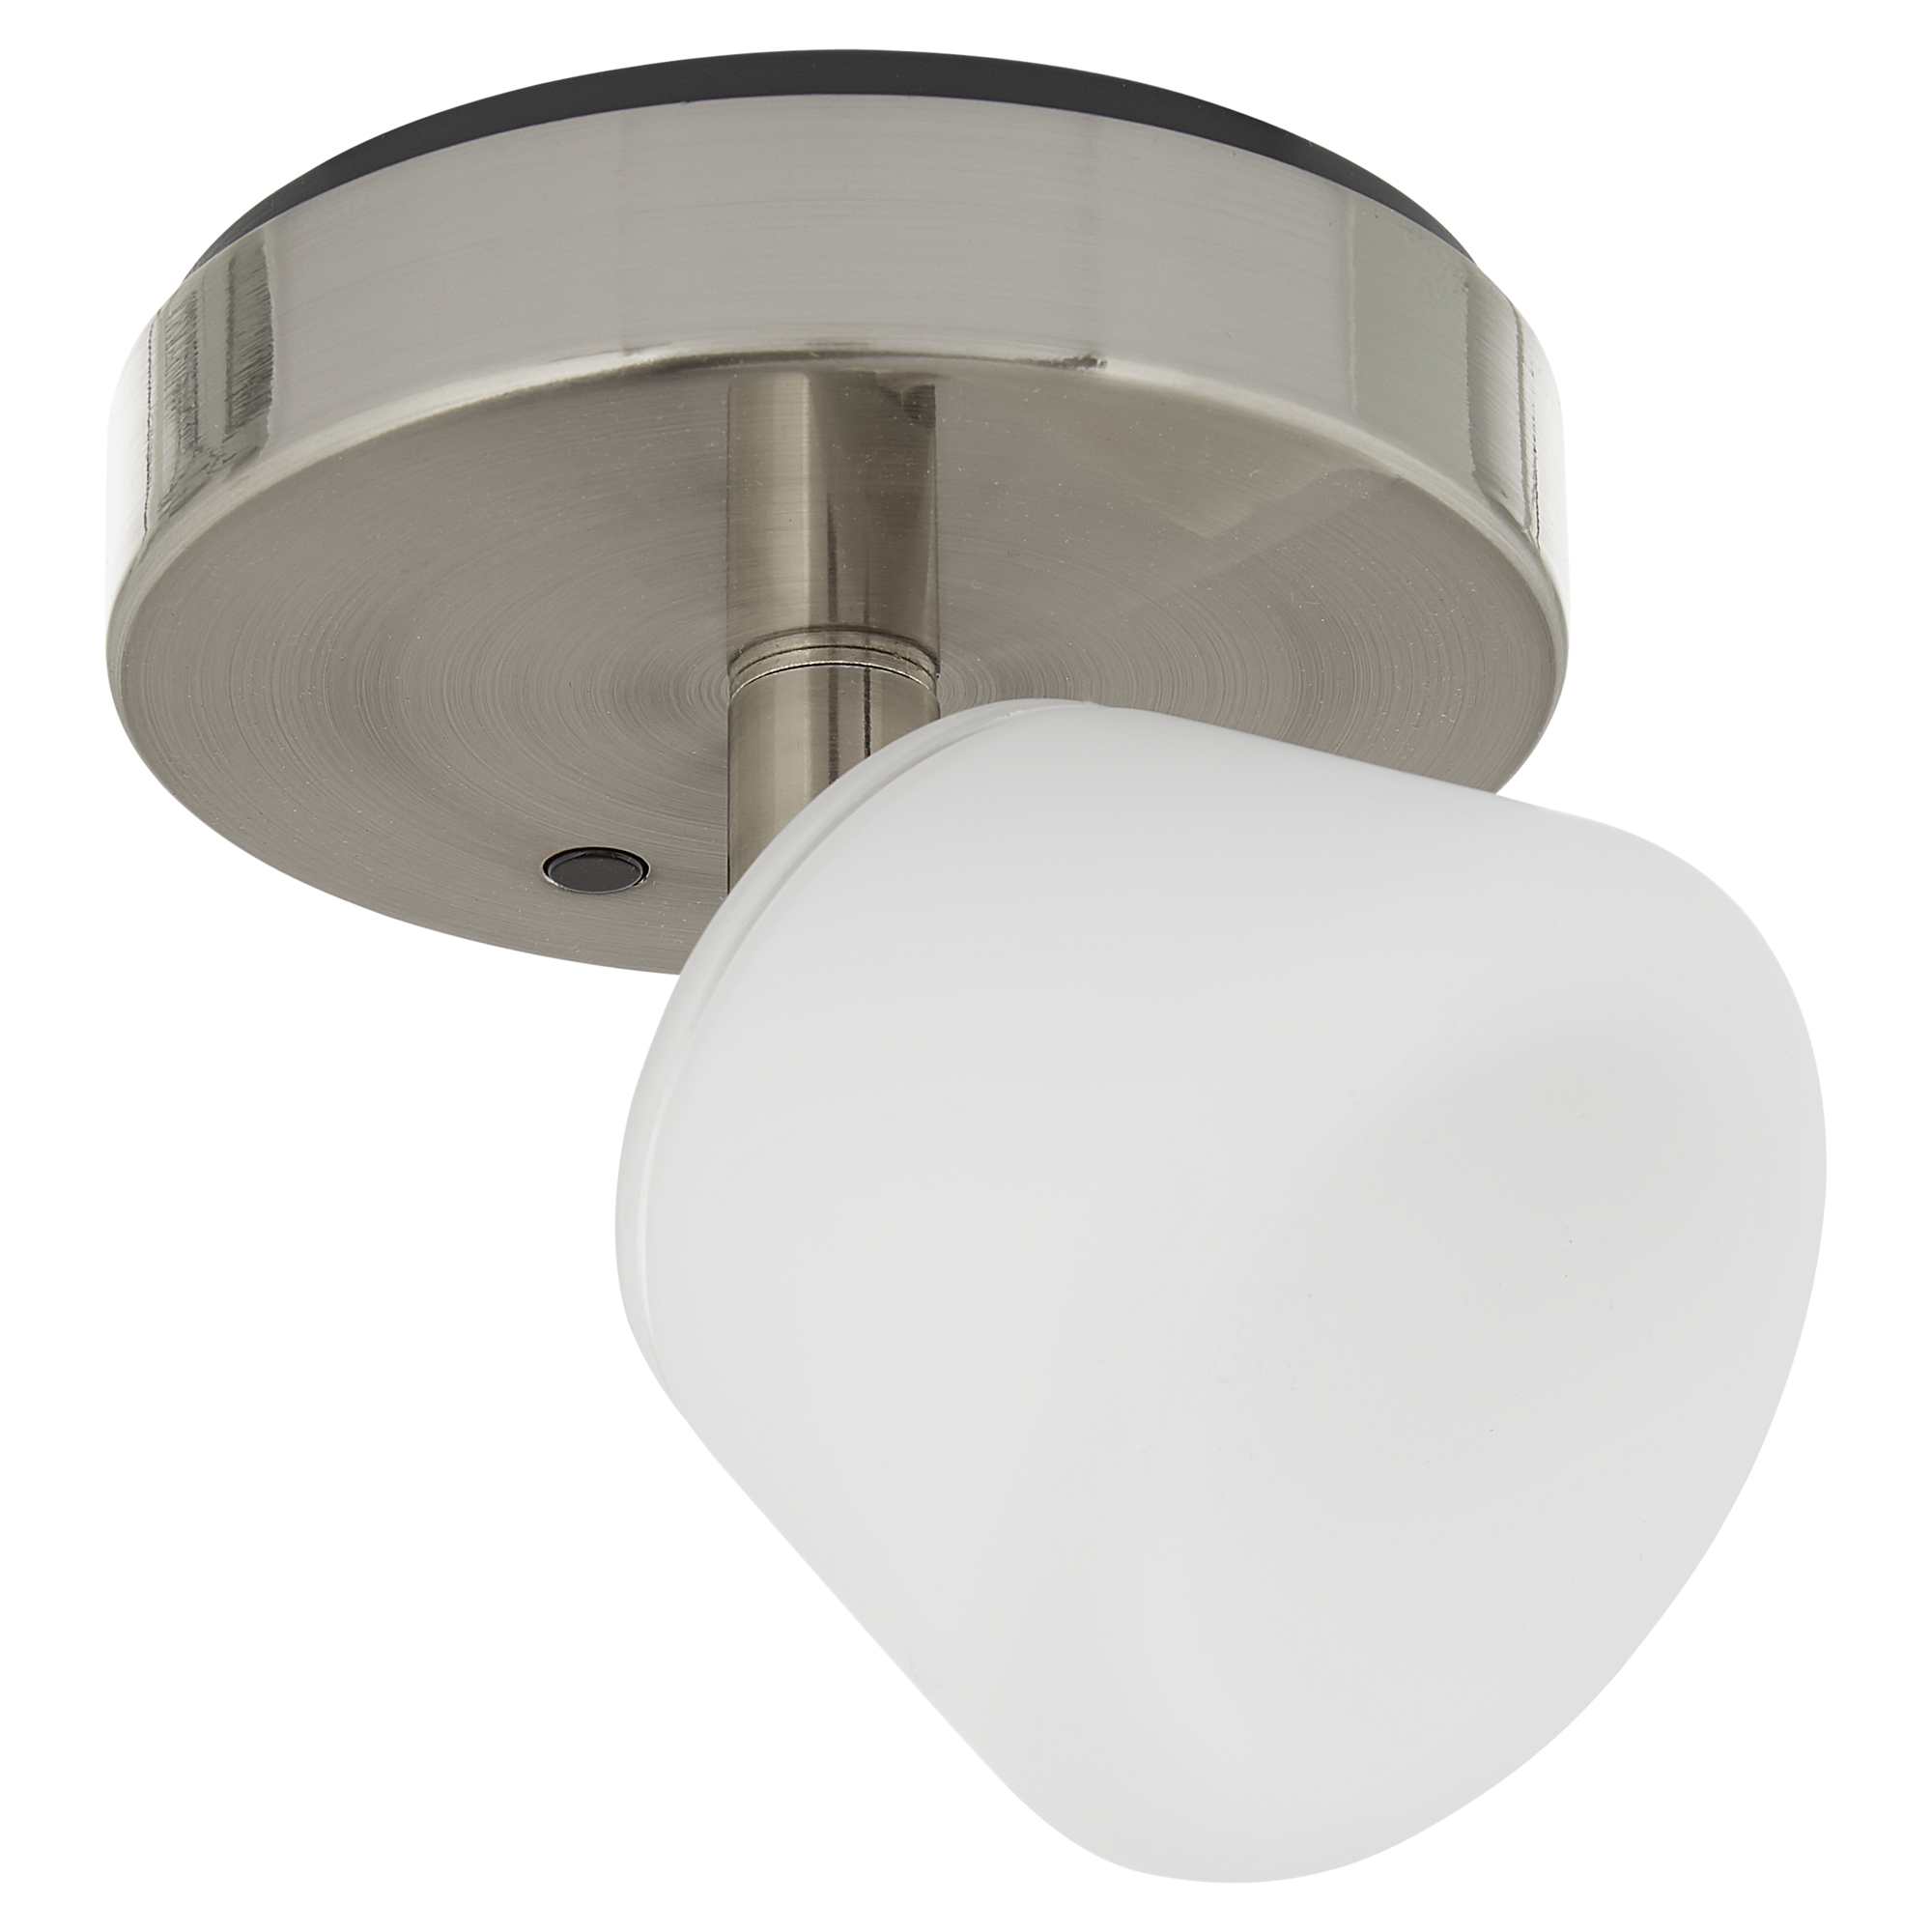 LED-Strahler 'iDual' Emerald Farbwechsel 6,5 W Ø 105 mm 1-flammig + product picture